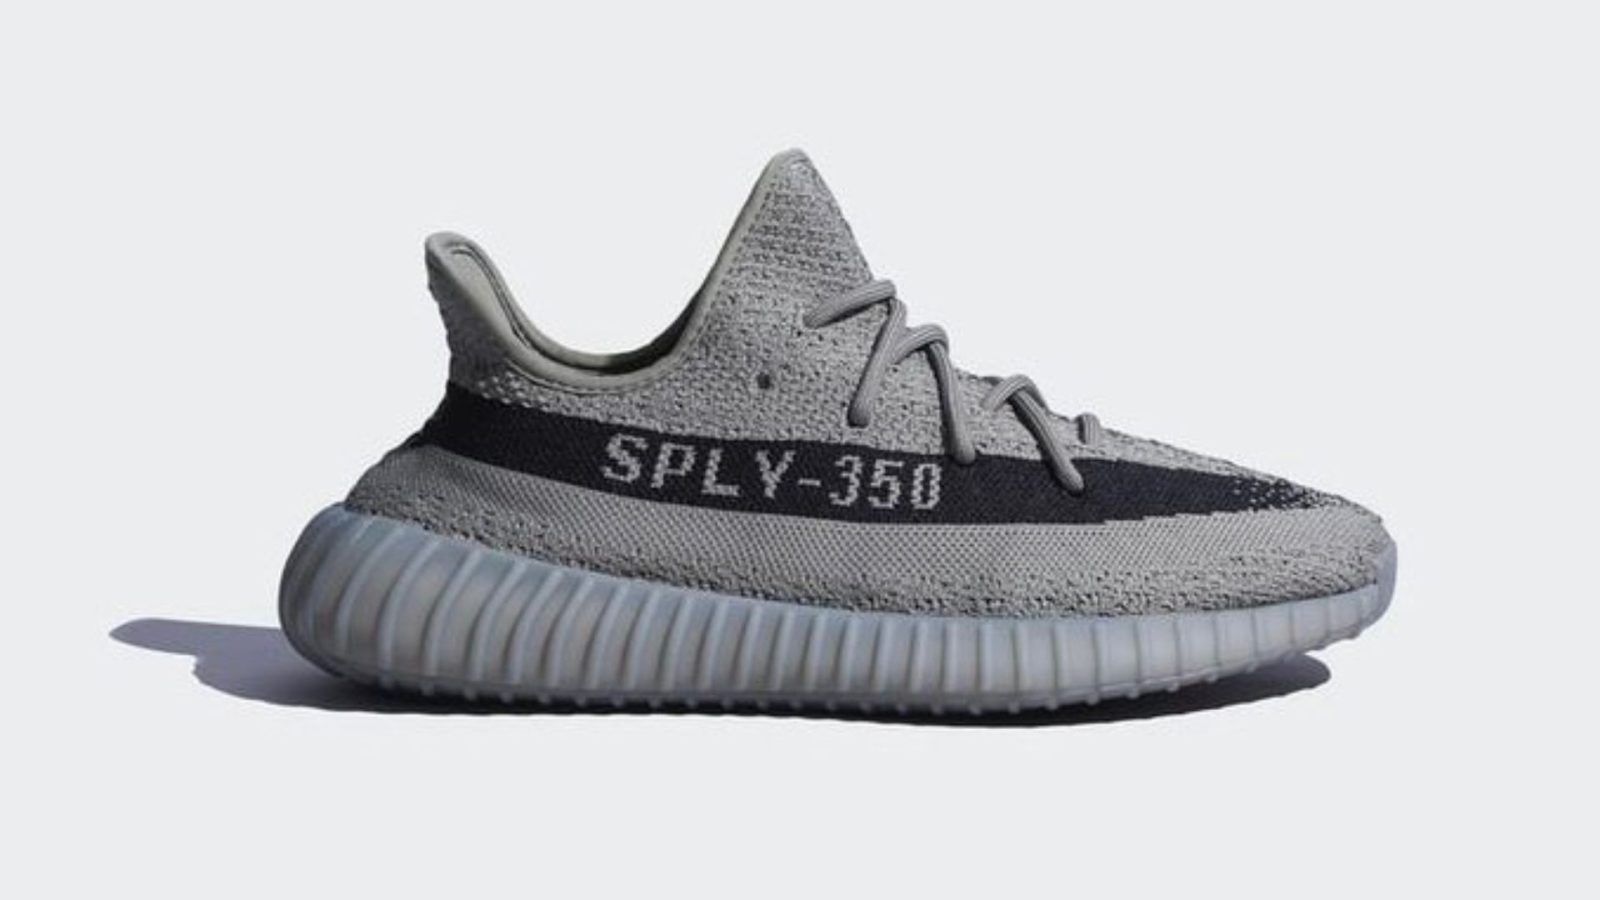 Adidas is unbranded YEEZY 350 V2 without Ye branding